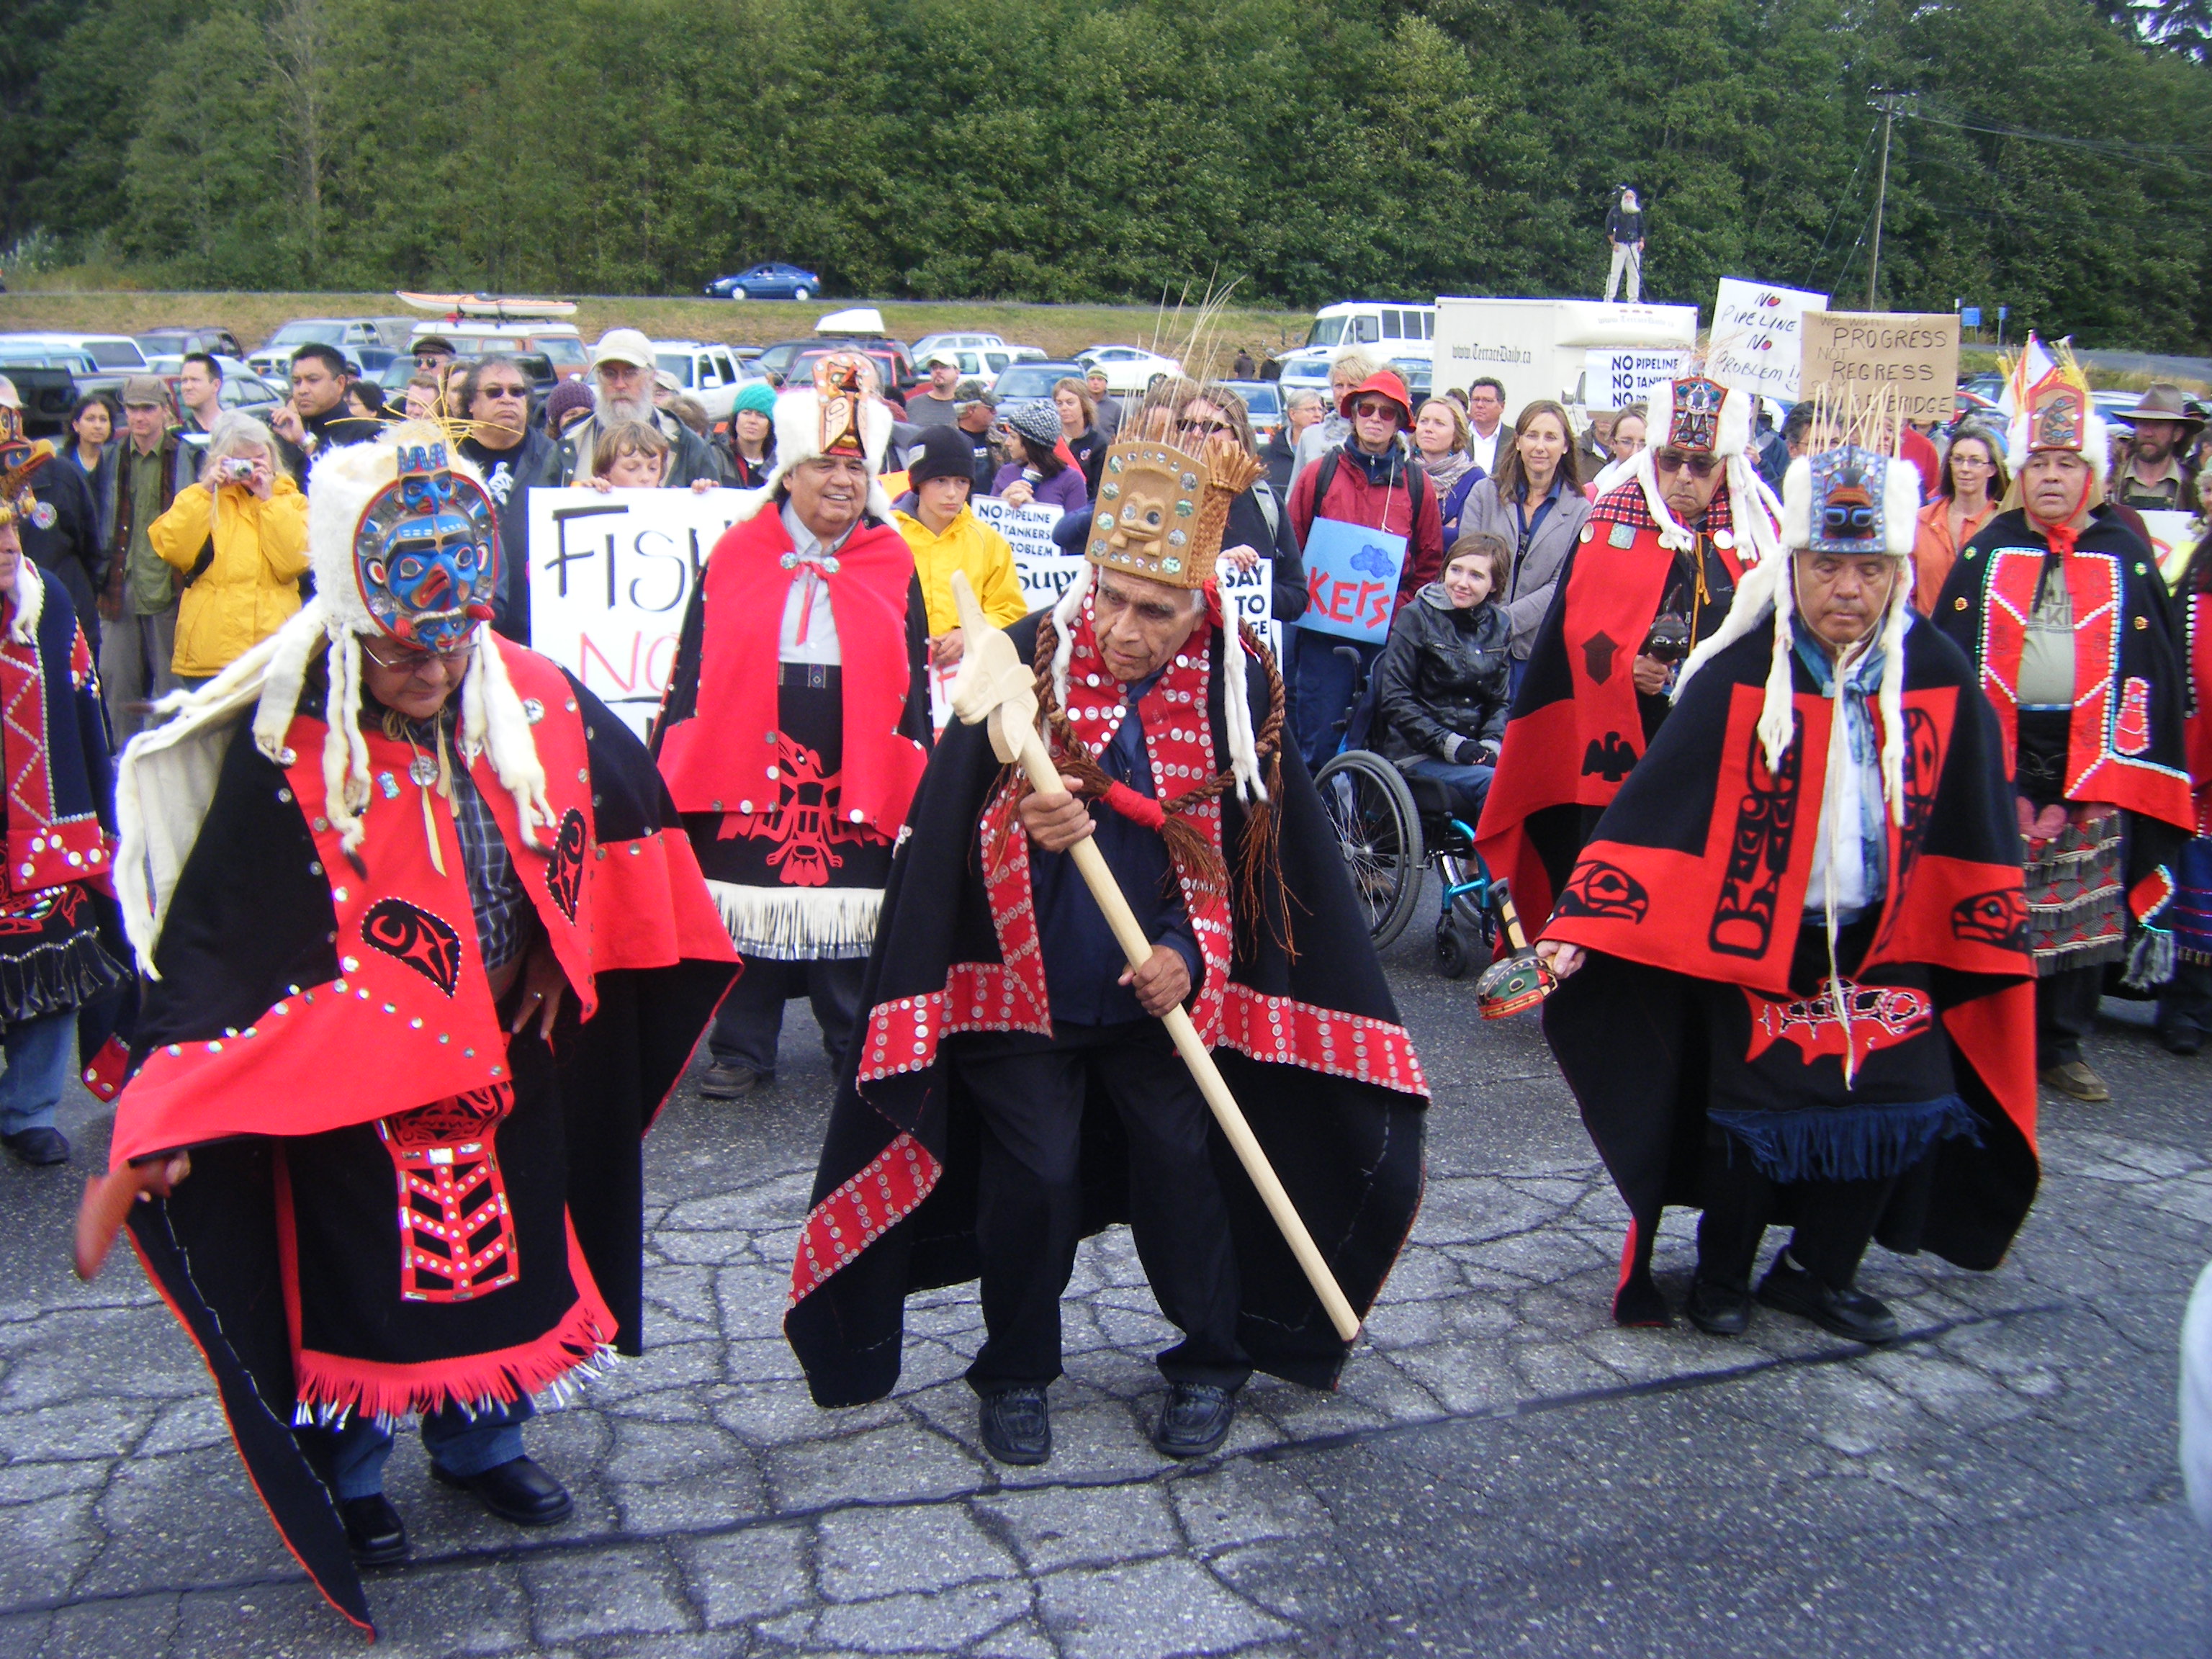 Members of the Heiltsuk First Nation from Bella Bella dancing in regelia at rally